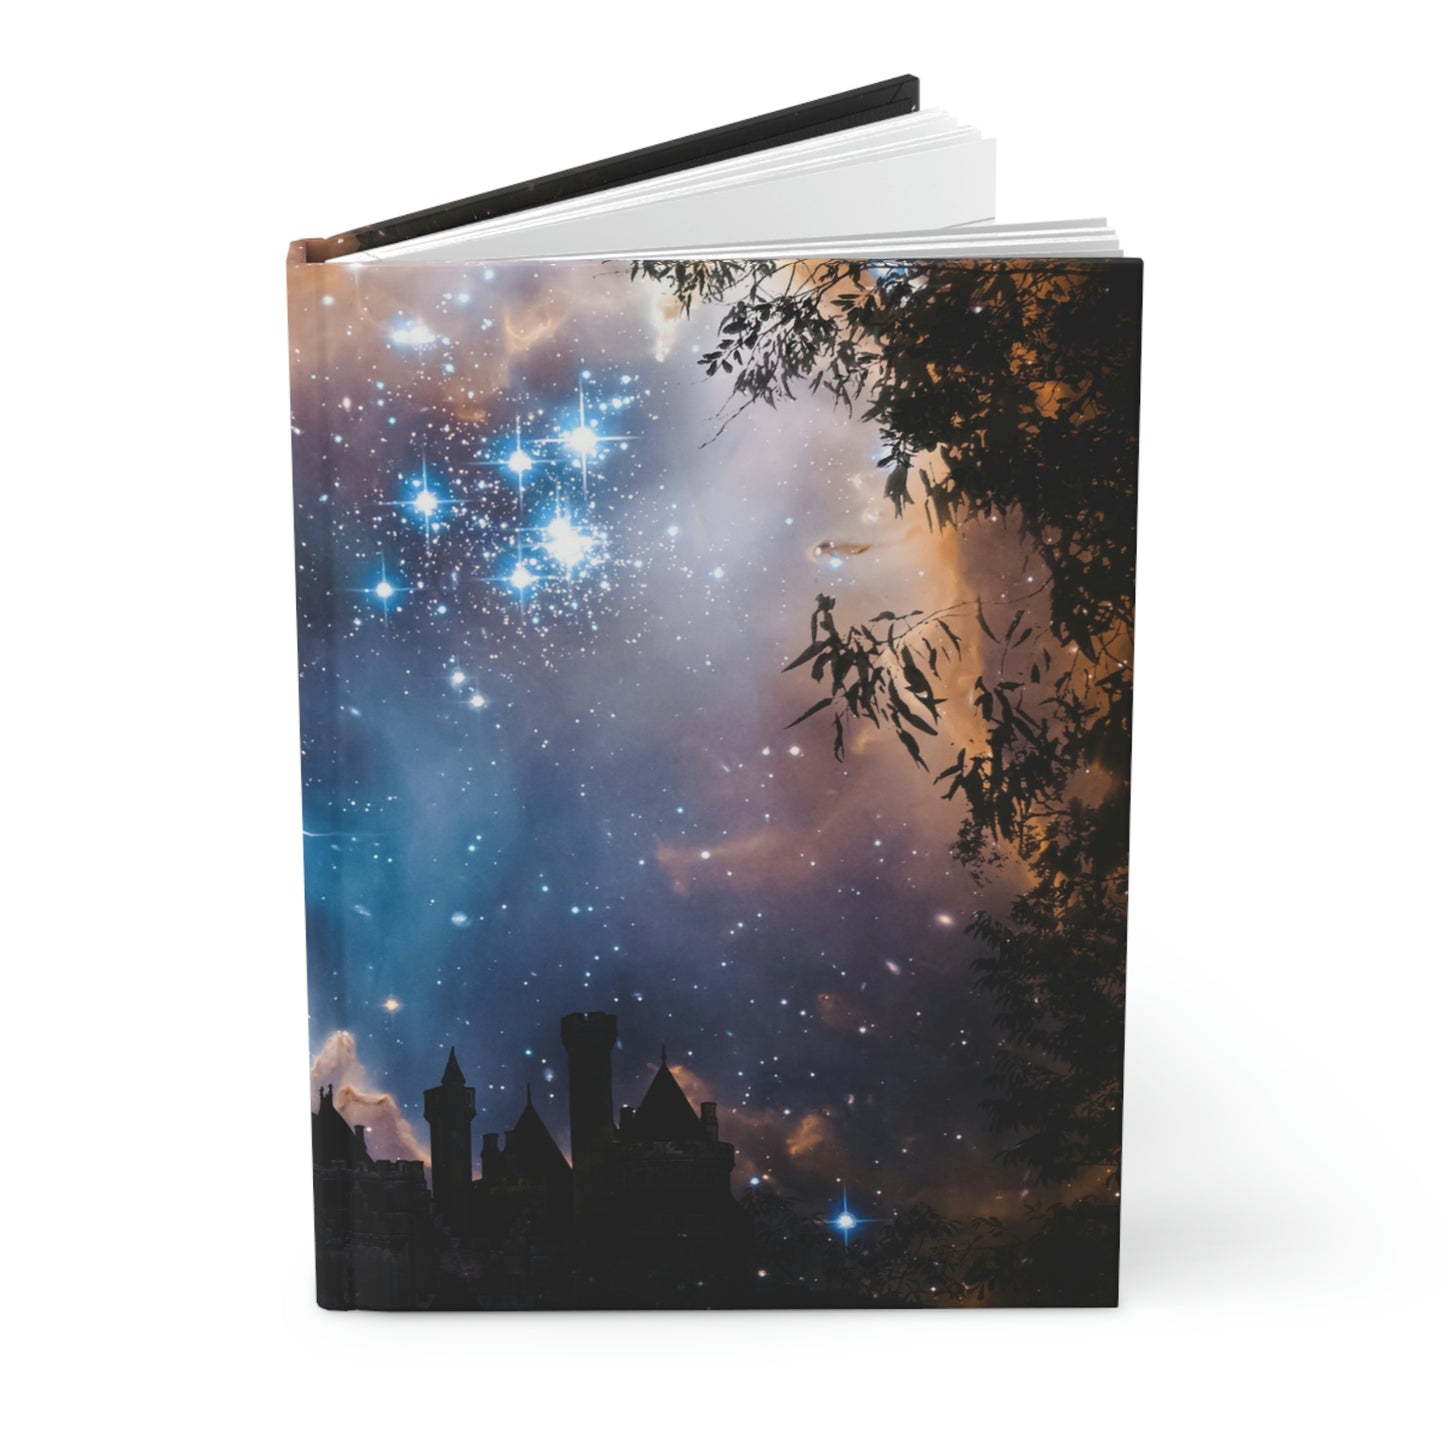 Prophecy Notebook Book Hardcover Journal Matte